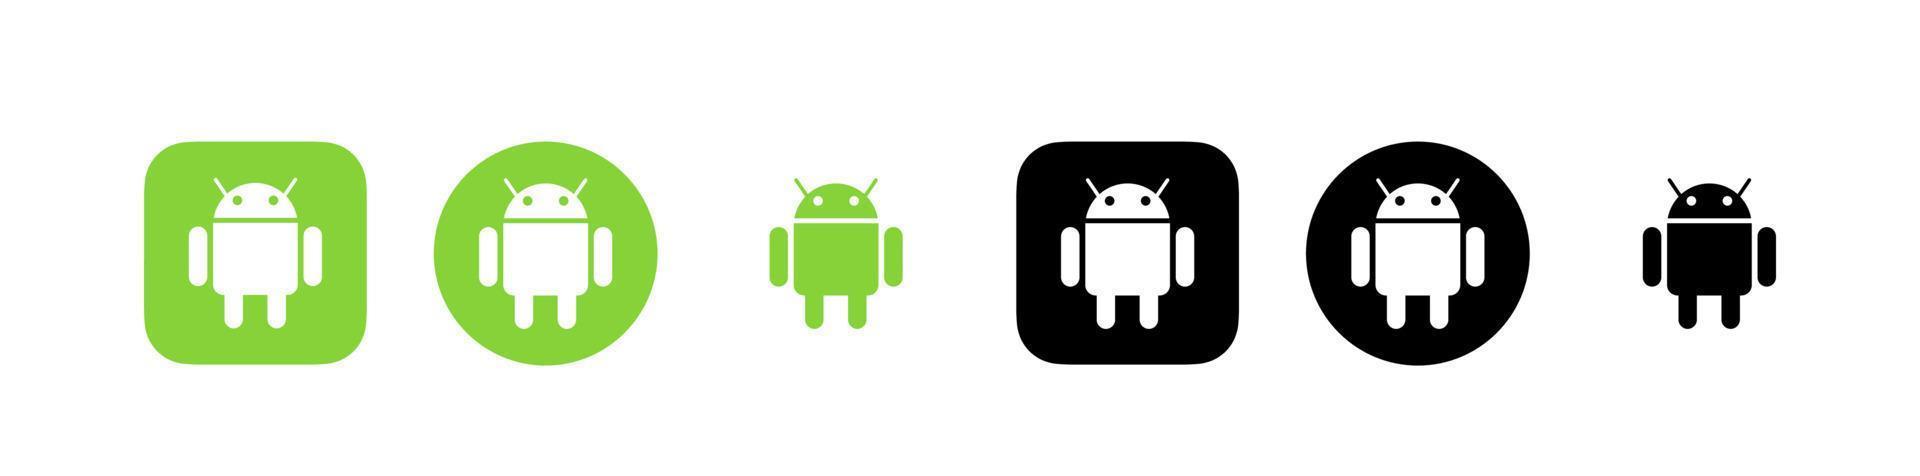 android logo vector, android icon free vector